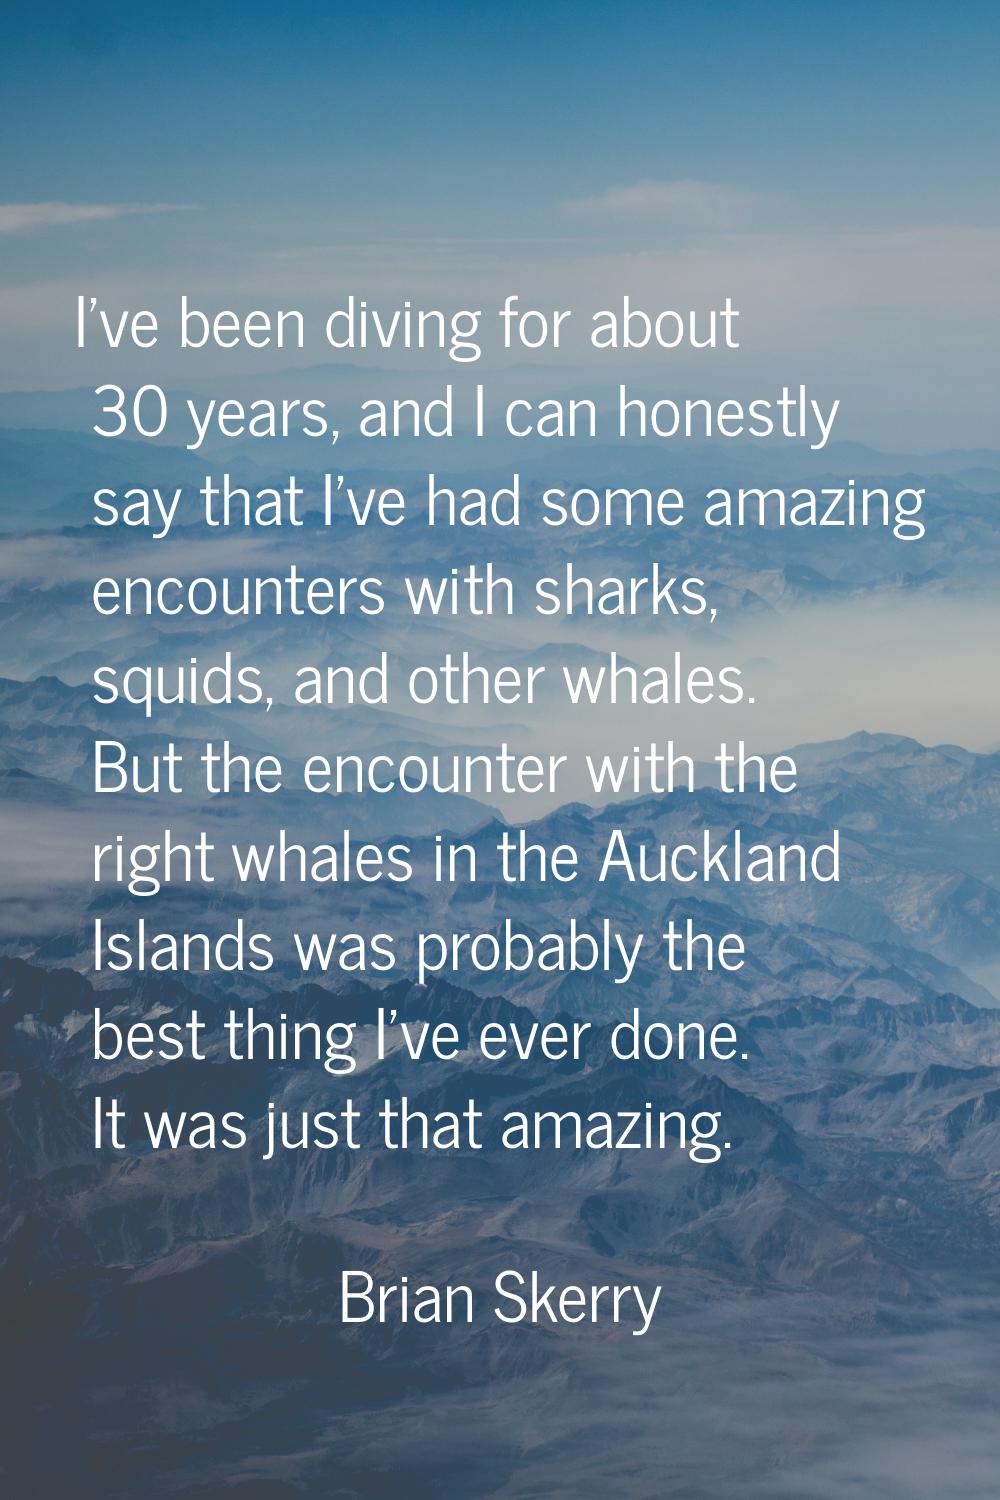 I've been diving for about 30 years, and I can honestly say that I've had some amazing encounters w